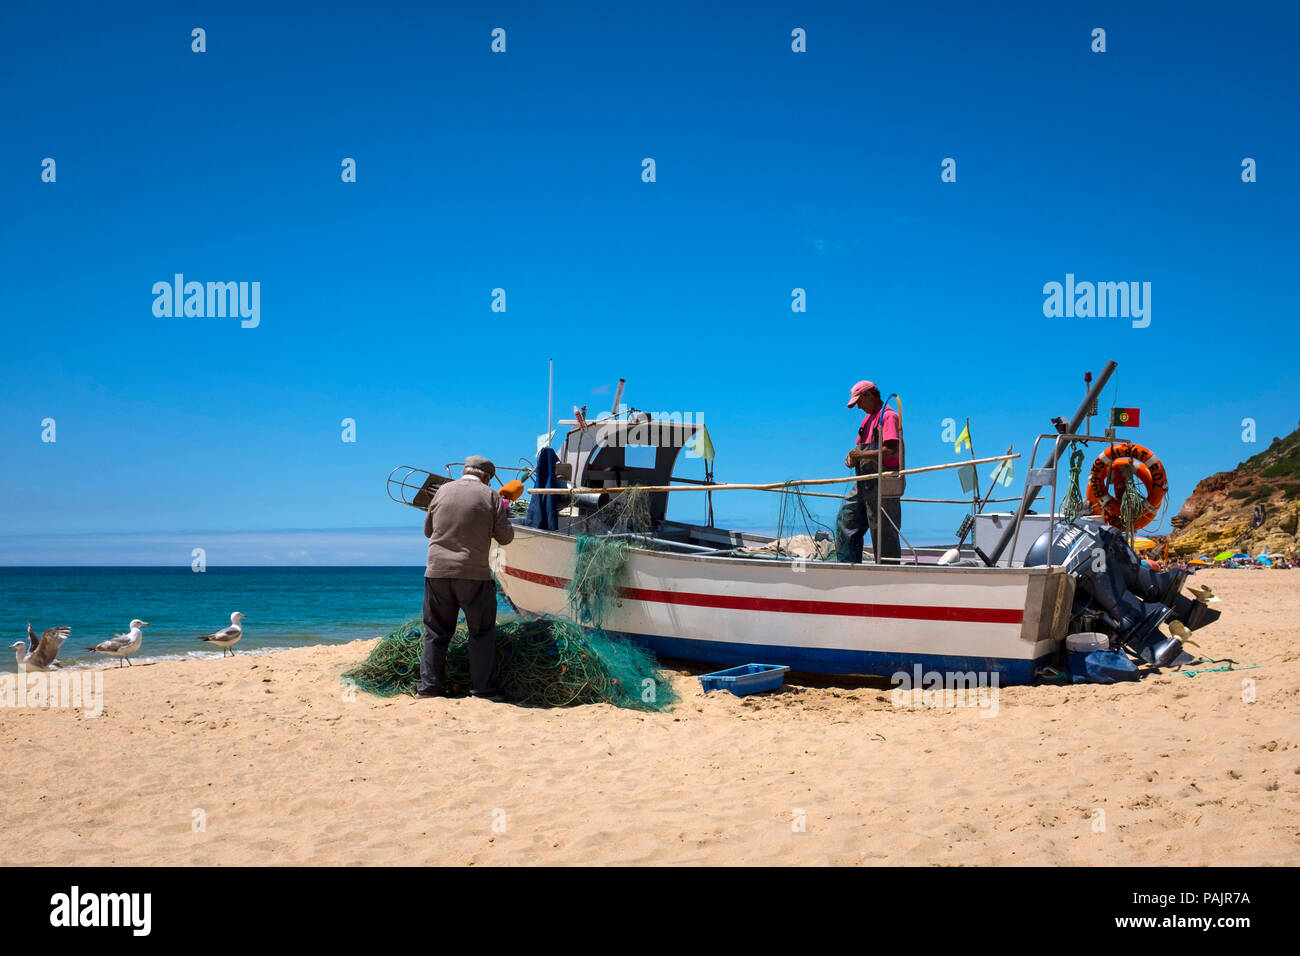 Small-scale fishermen cleaning their nets, in Salema, Algarve, Portugal. Stock Photo